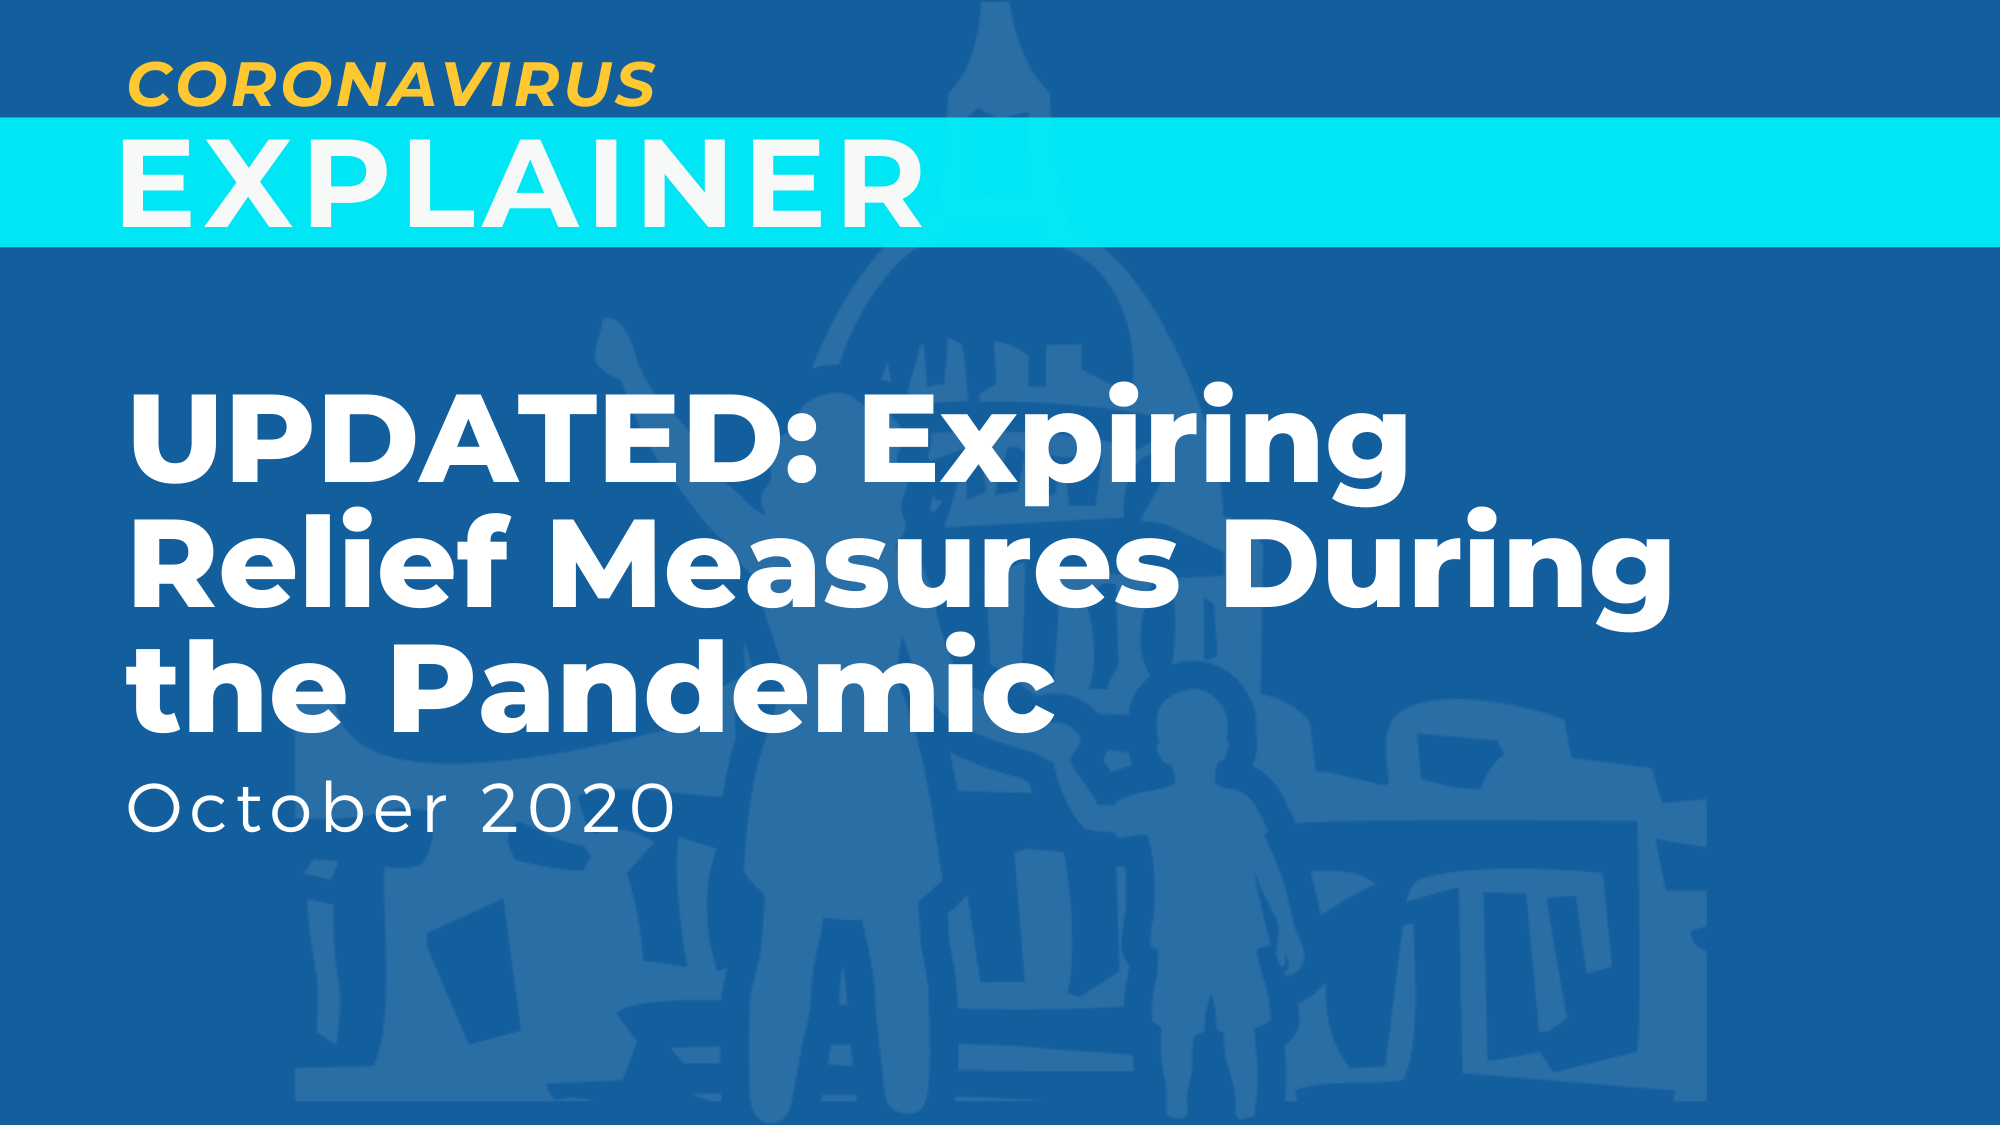 UPDATED: Expiring Relief Measures During the Pandemic